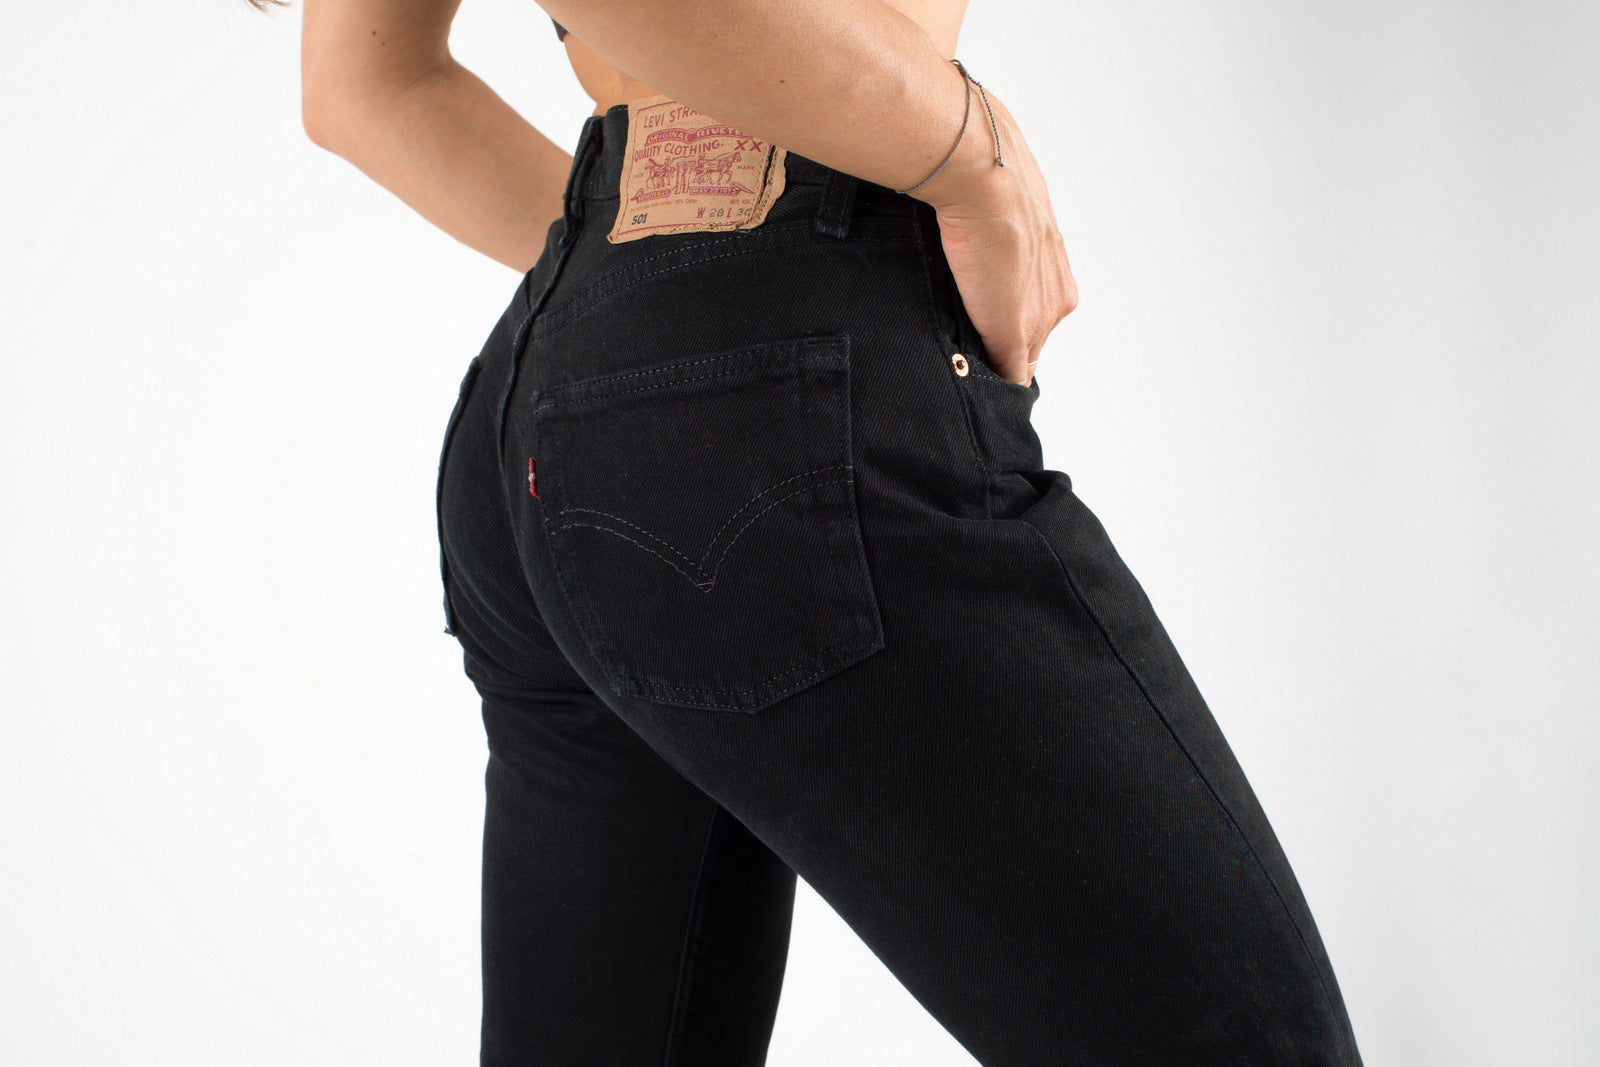 Levi’s 501 Vintage Black Reworked Women's Jeans, Made in UK